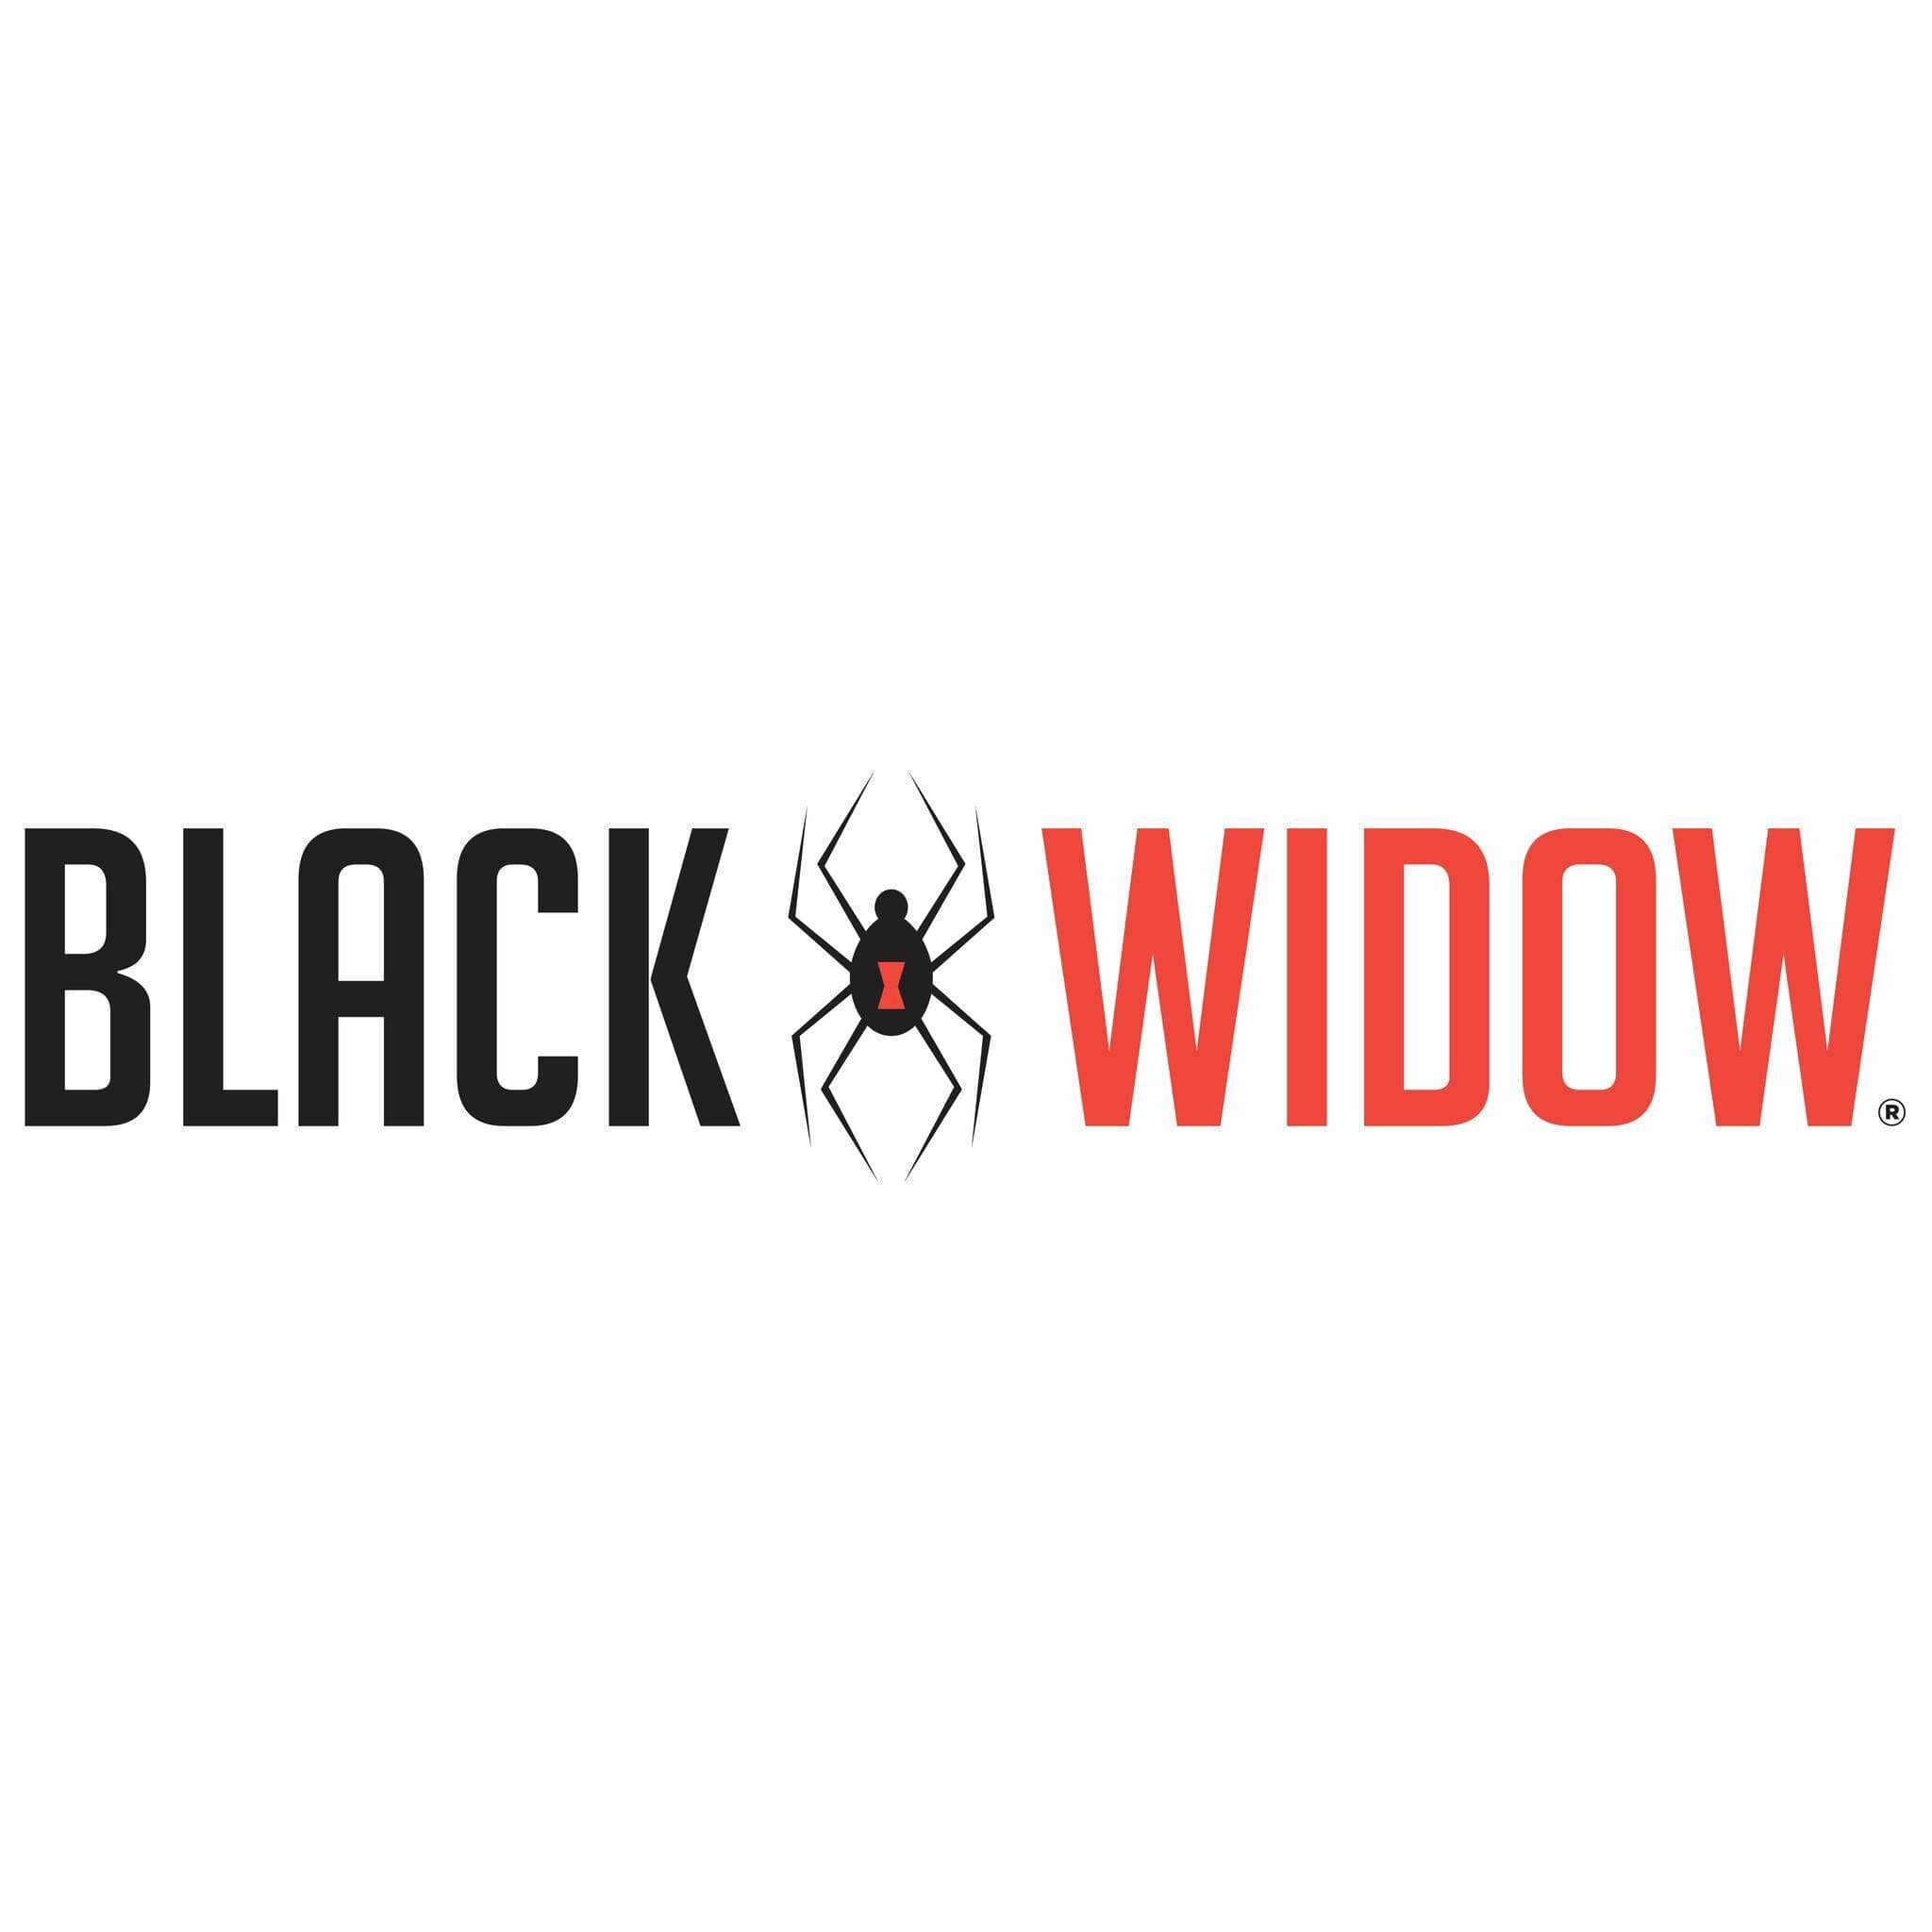 Black Widow coupon codes, promo codes and deals